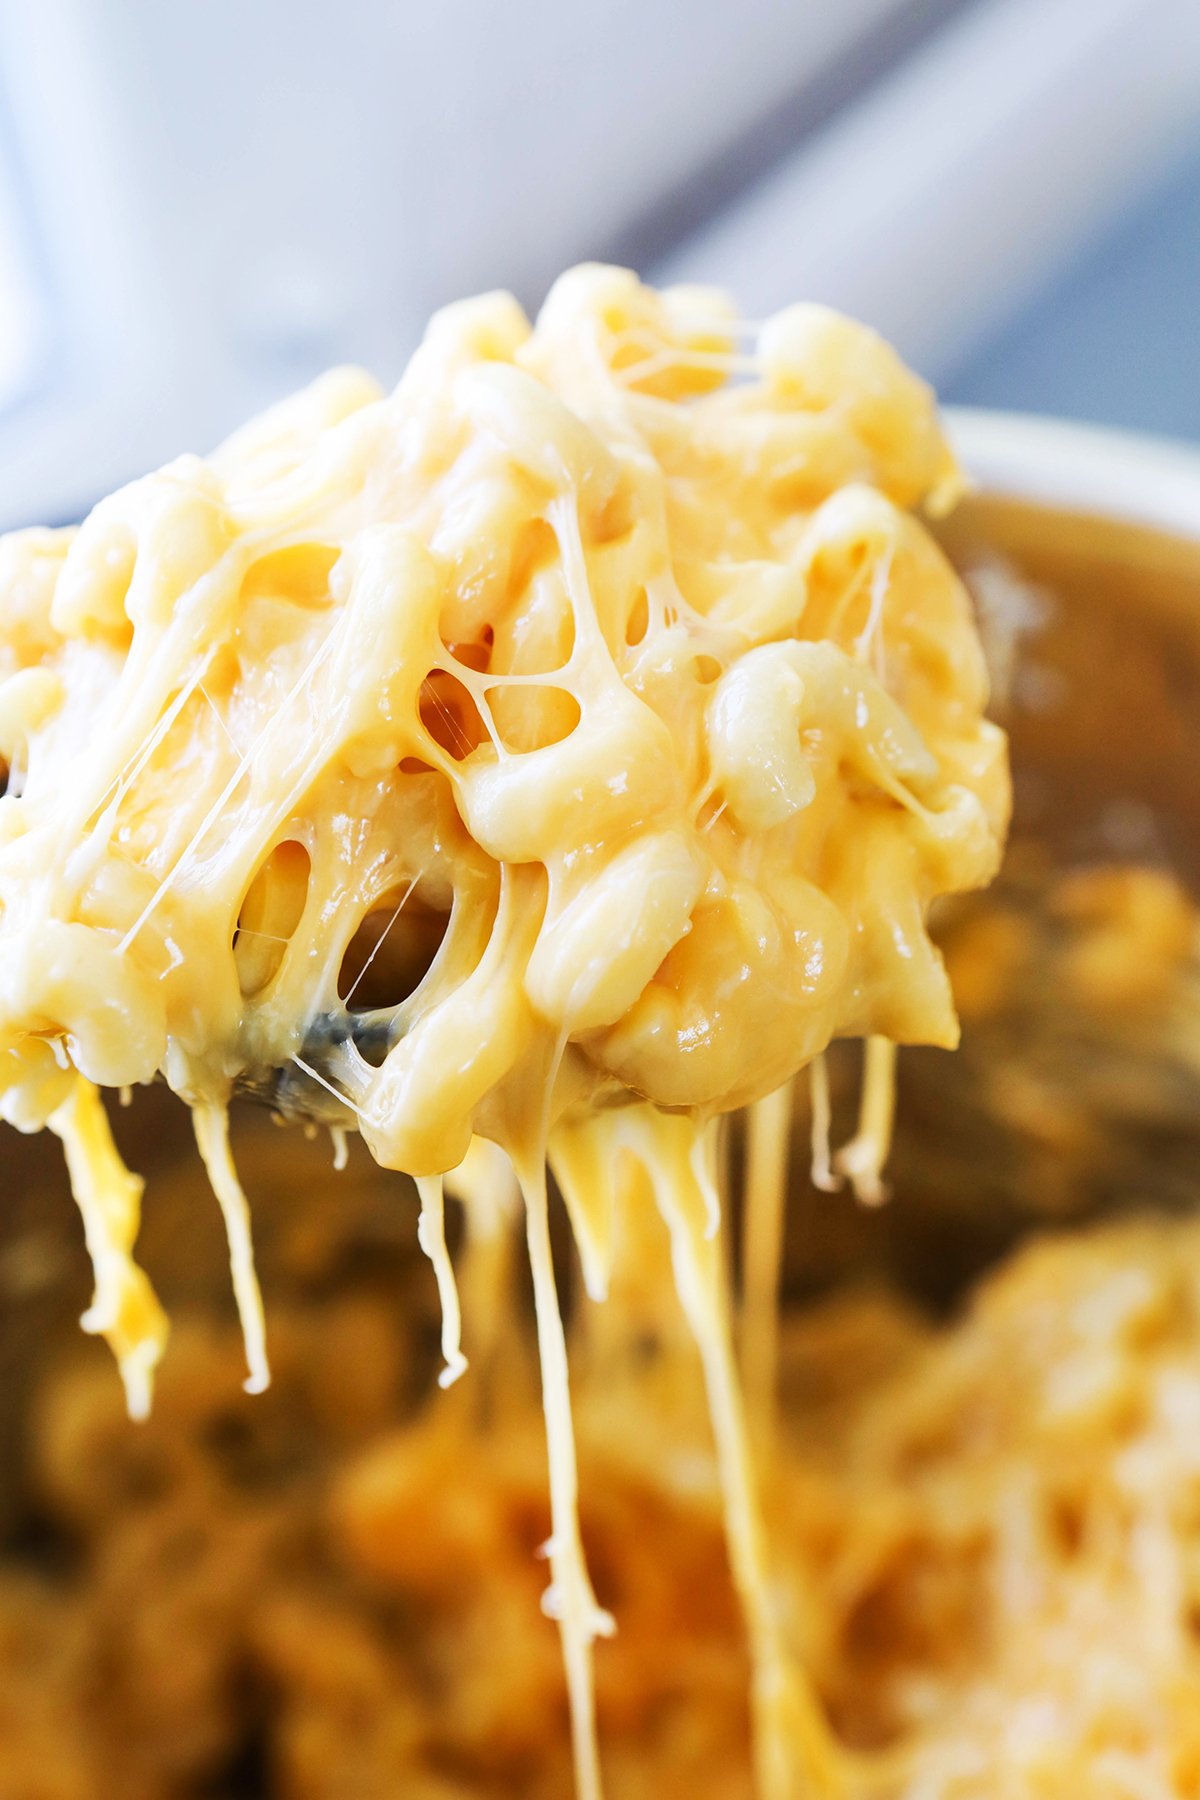 Large spoonful of super cheesy mac and cheese being pulled from a pot.